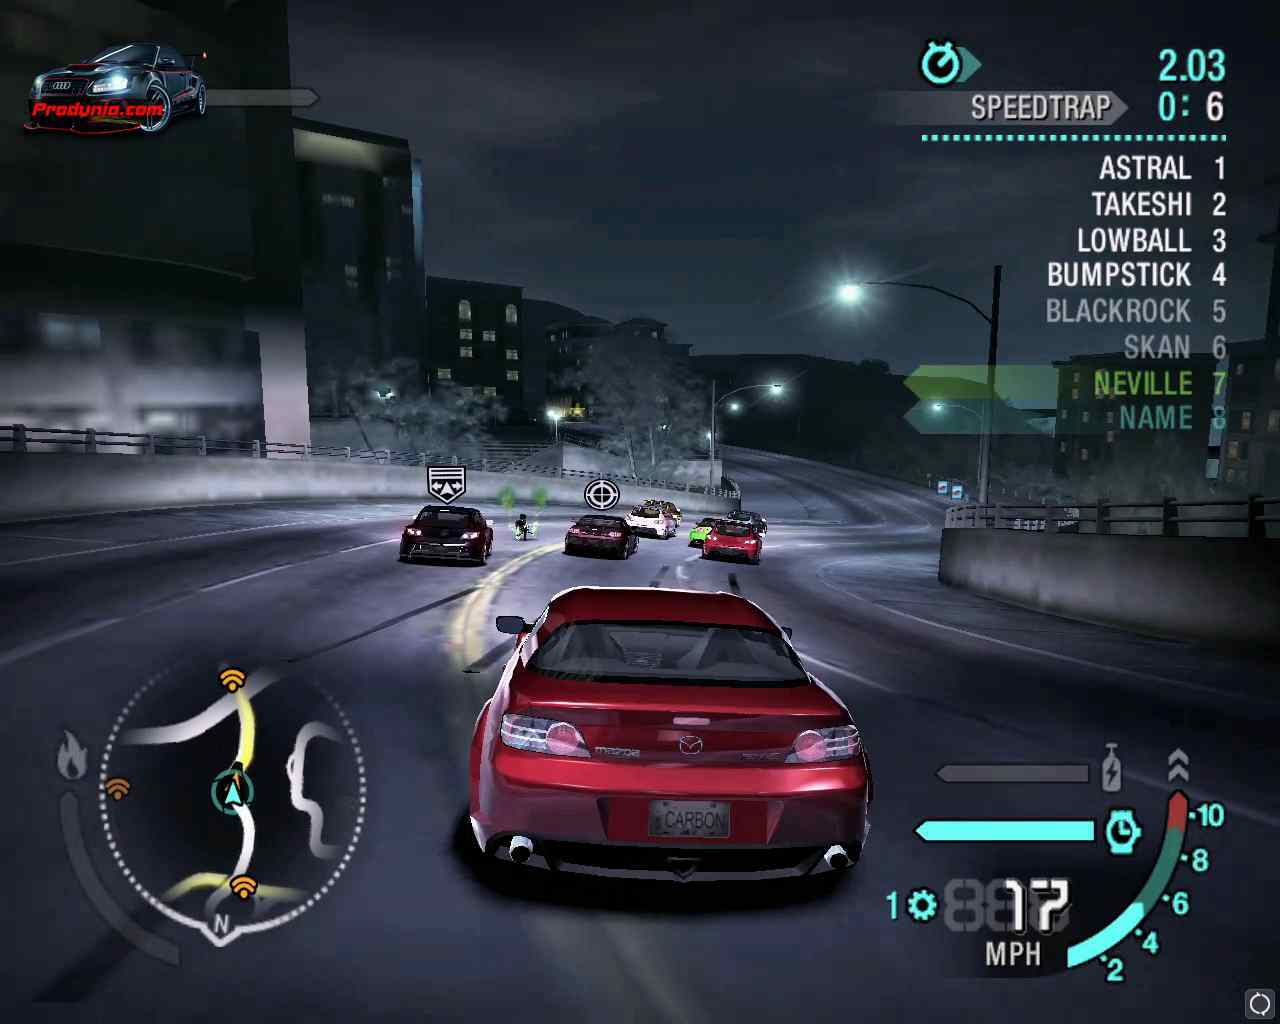 need for speed carbon pc completo